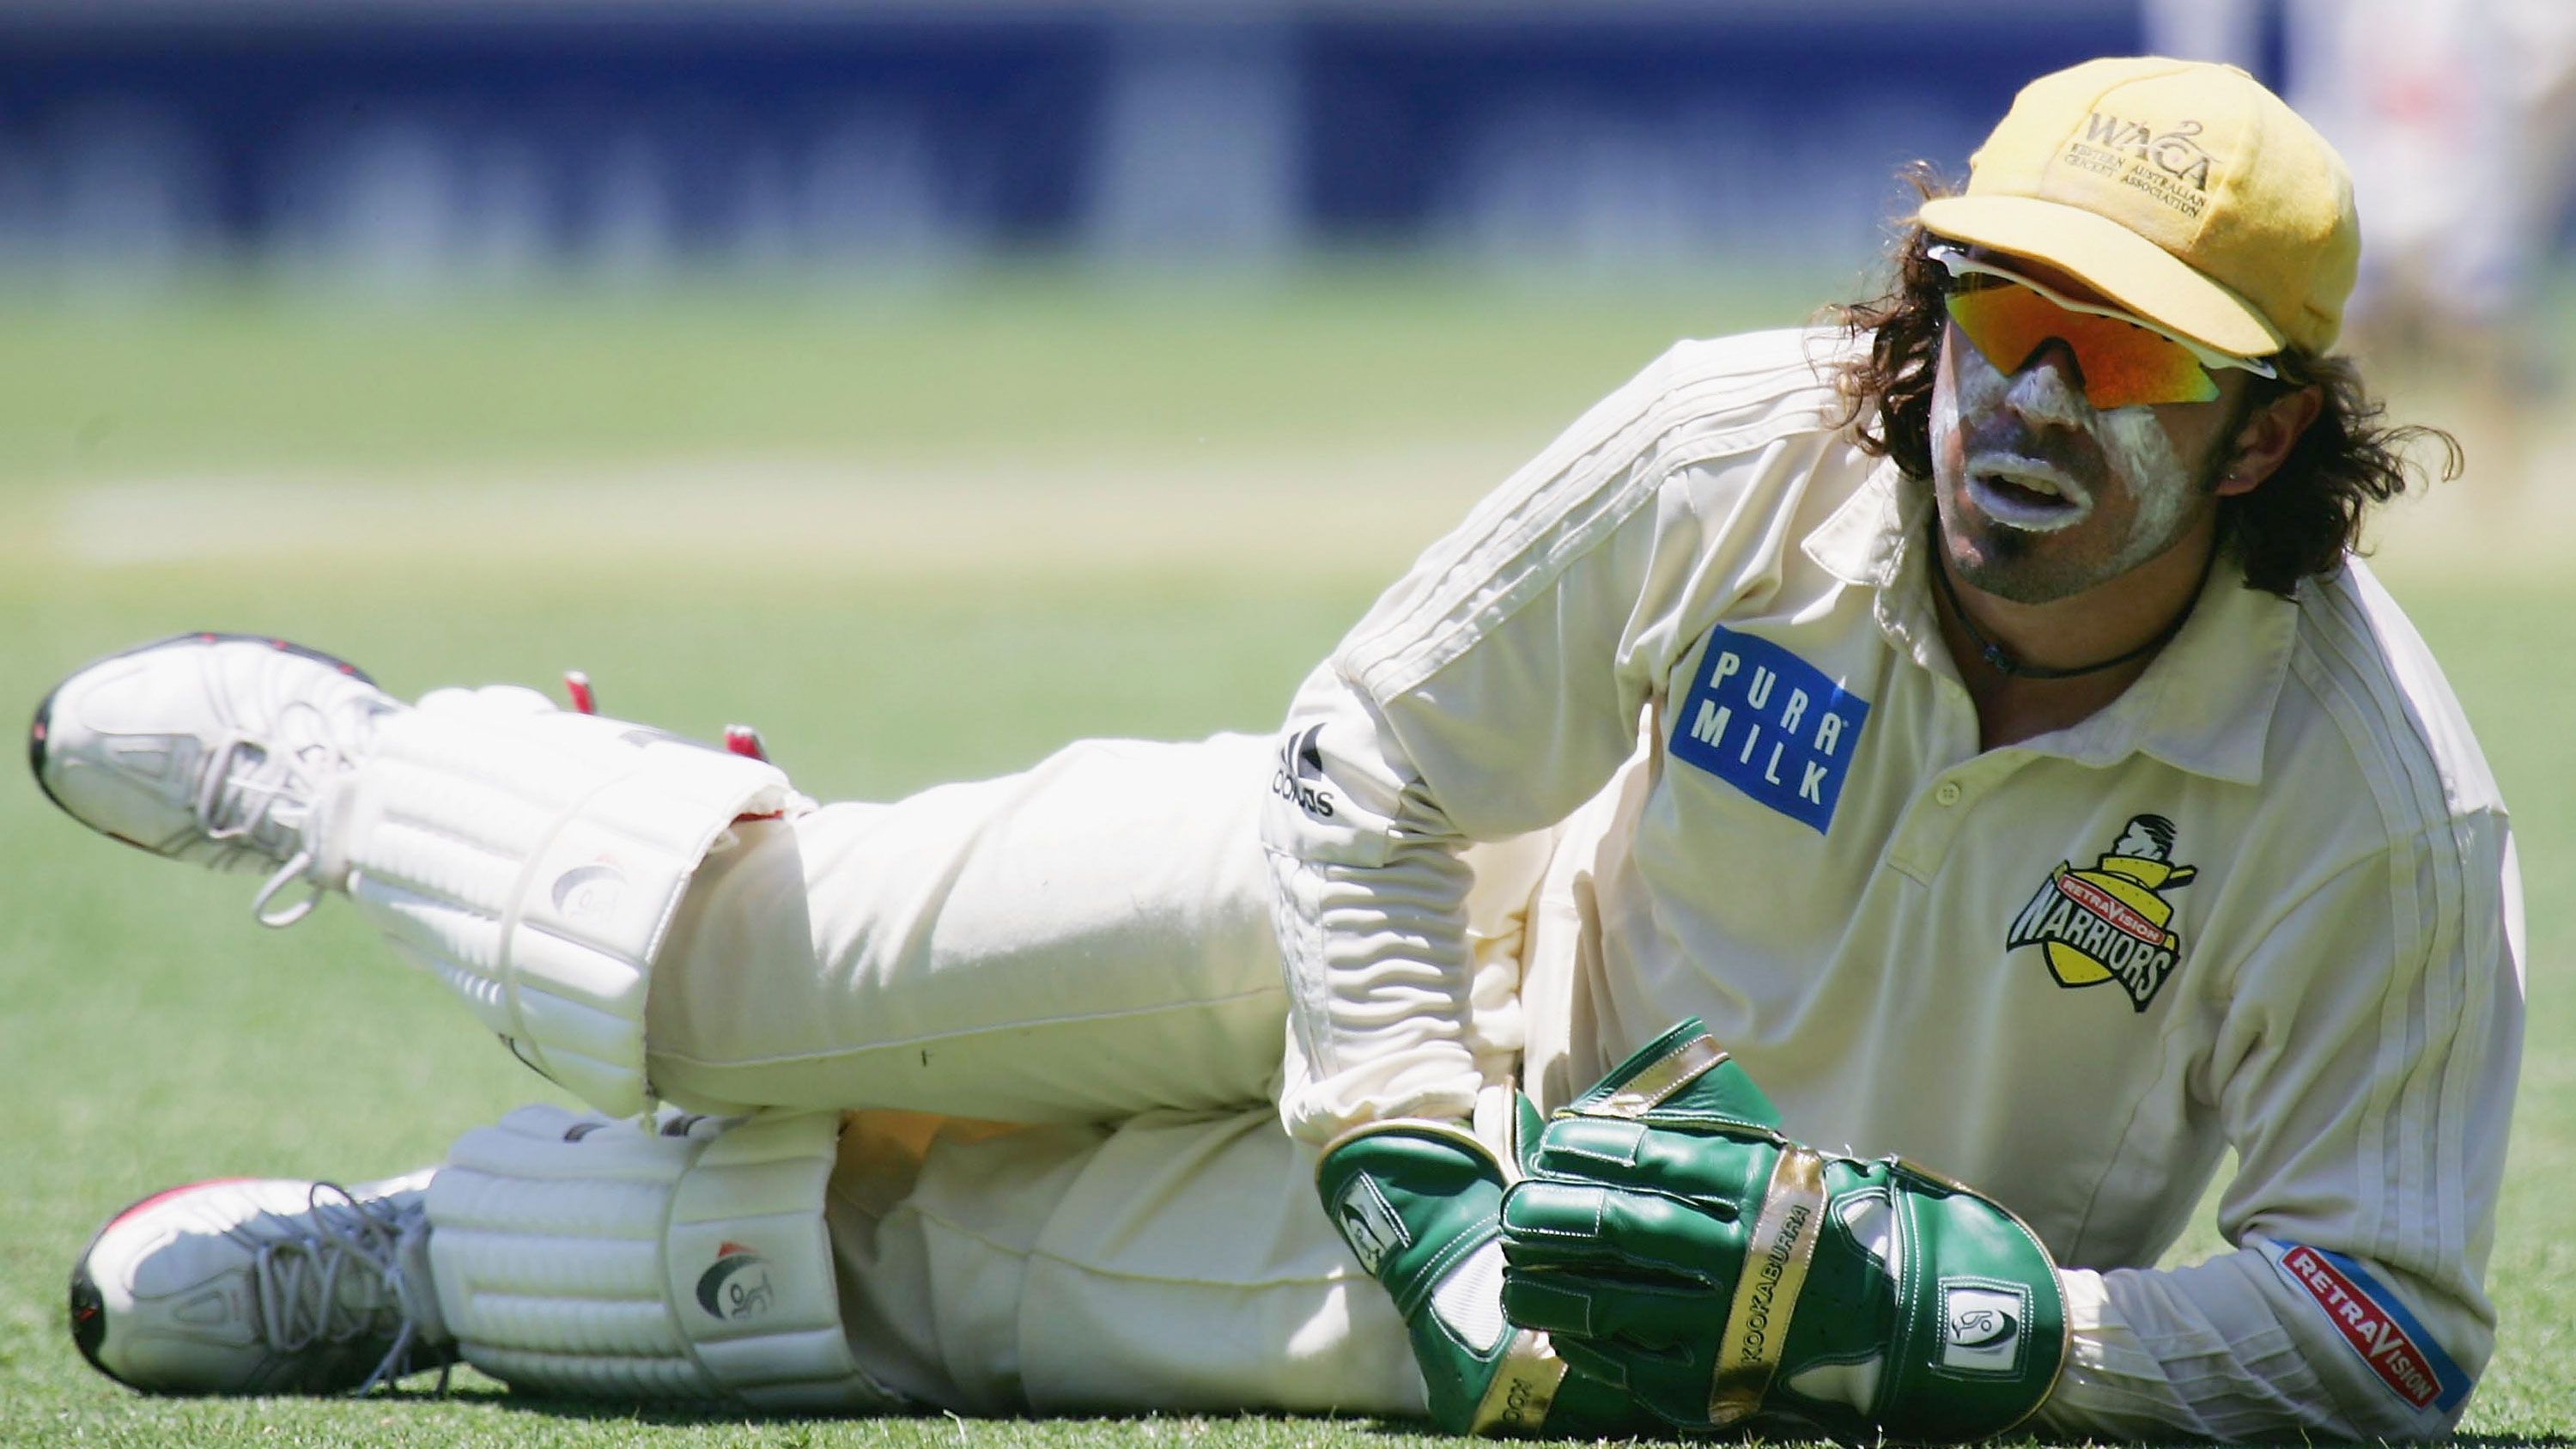 Wicket-keeper Ryan Campbell during day one of a Pura Cup Match between the Queensland Bulls and Western Warriors at the Gabba on December 17, 2005.